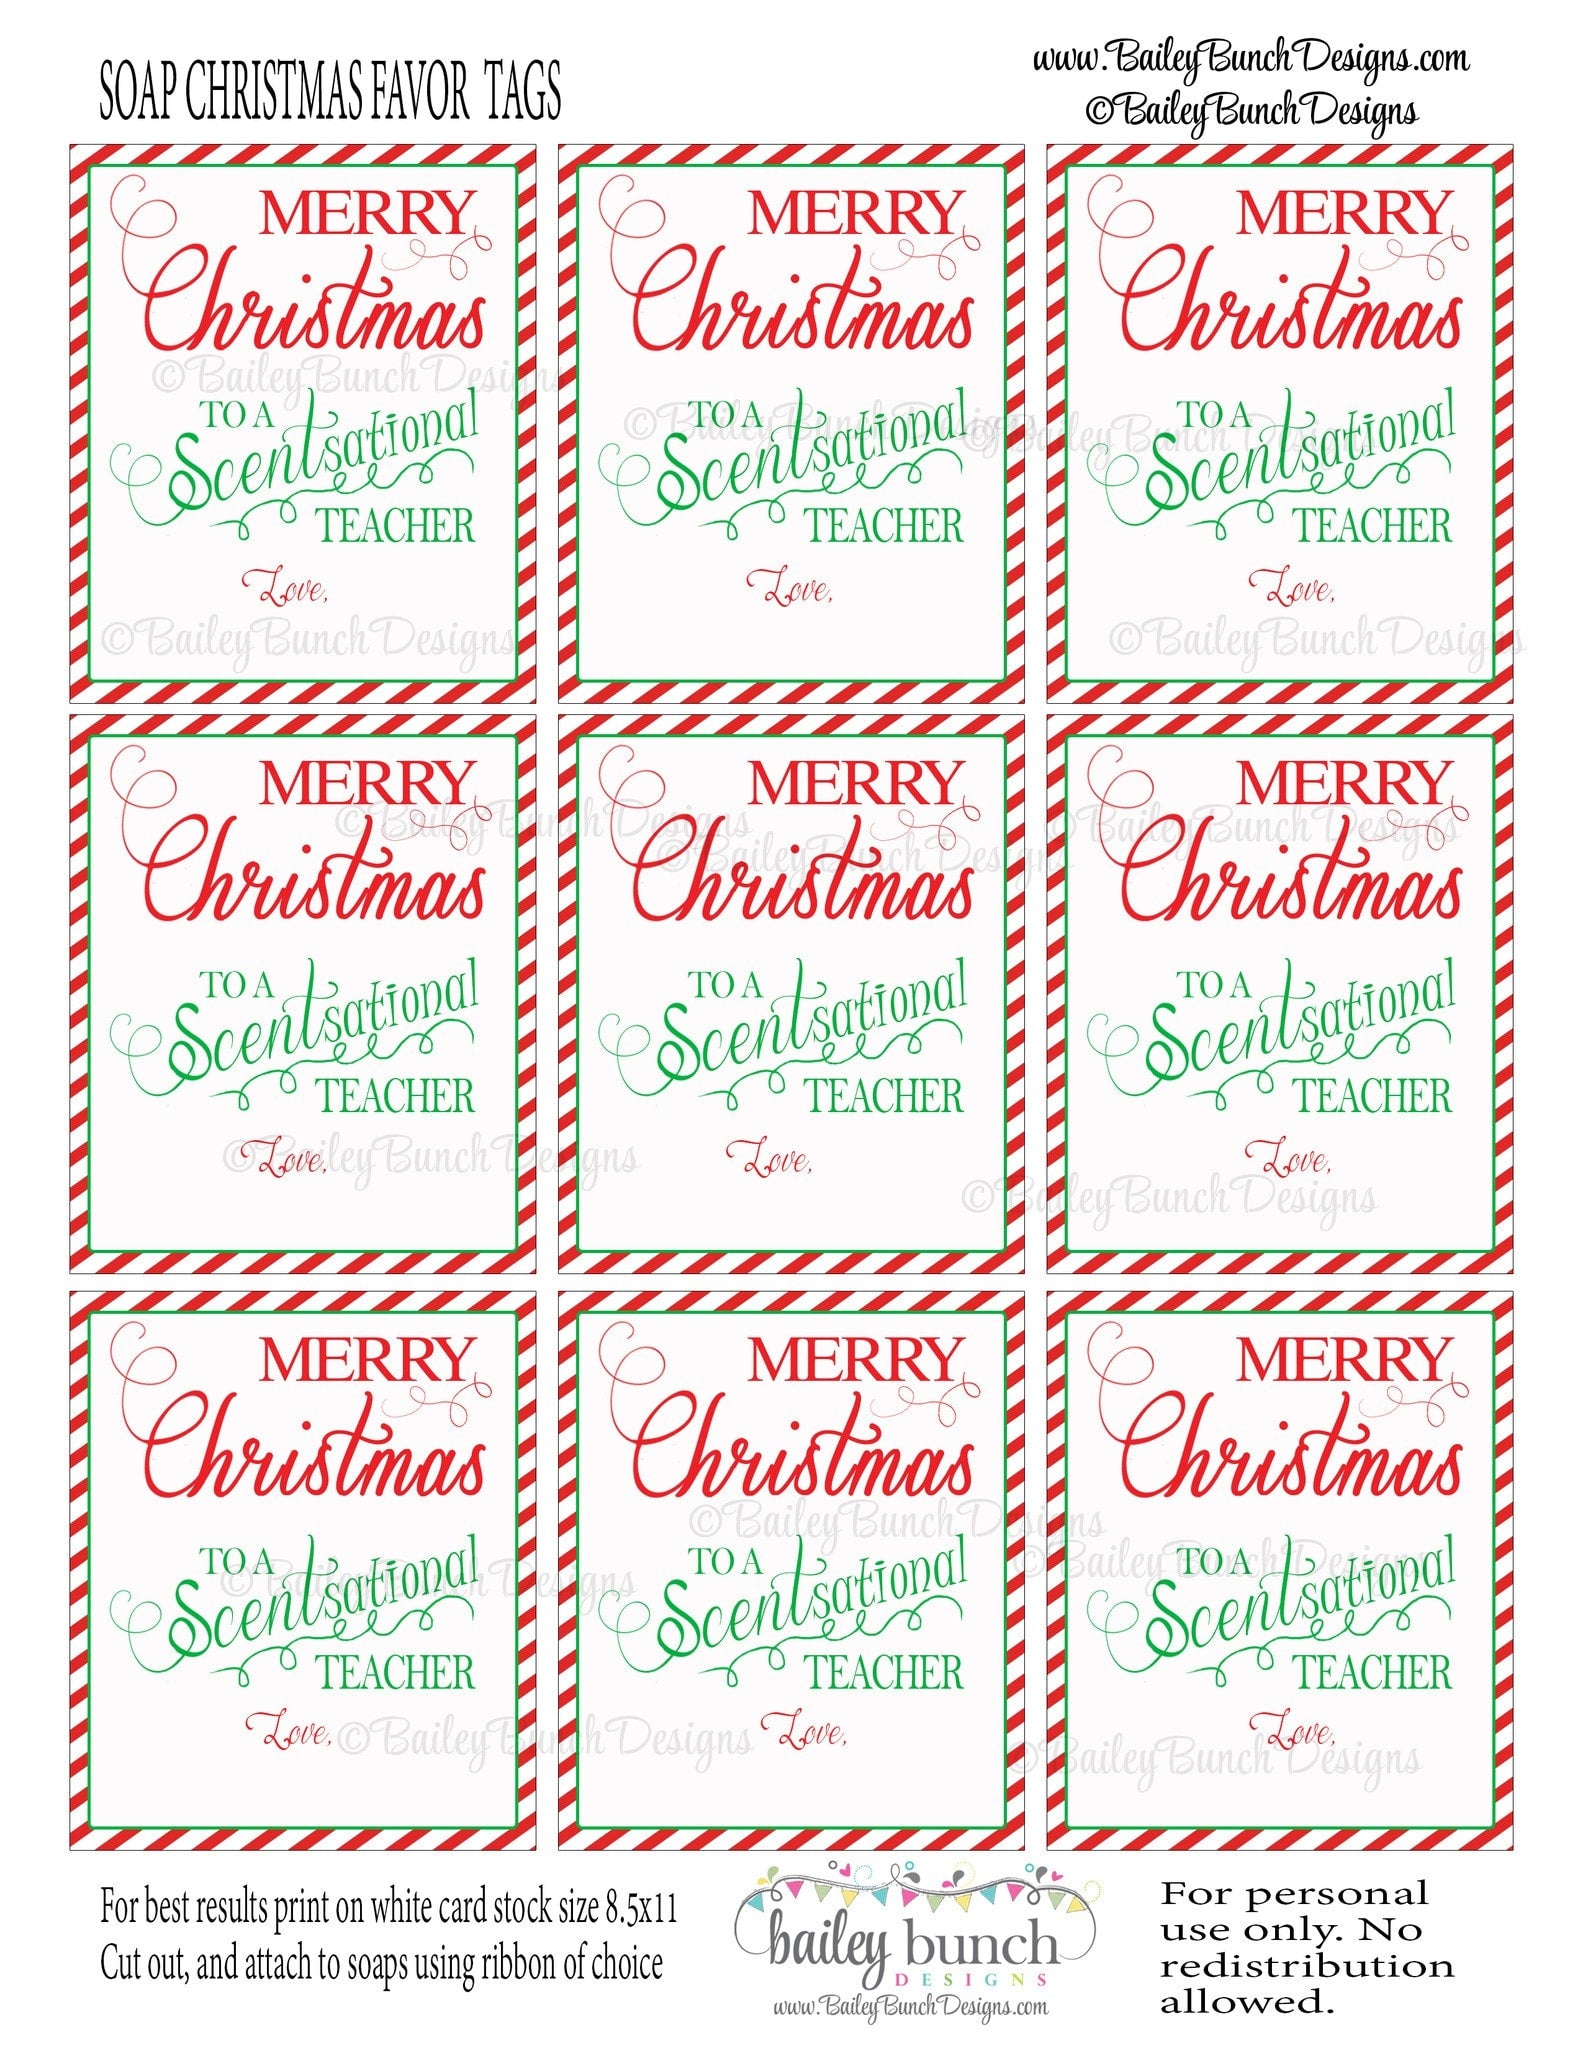 Soap Gift Labels, Teacher Christmas Gift IDSOAP0520 - Bailey Bunch Designs